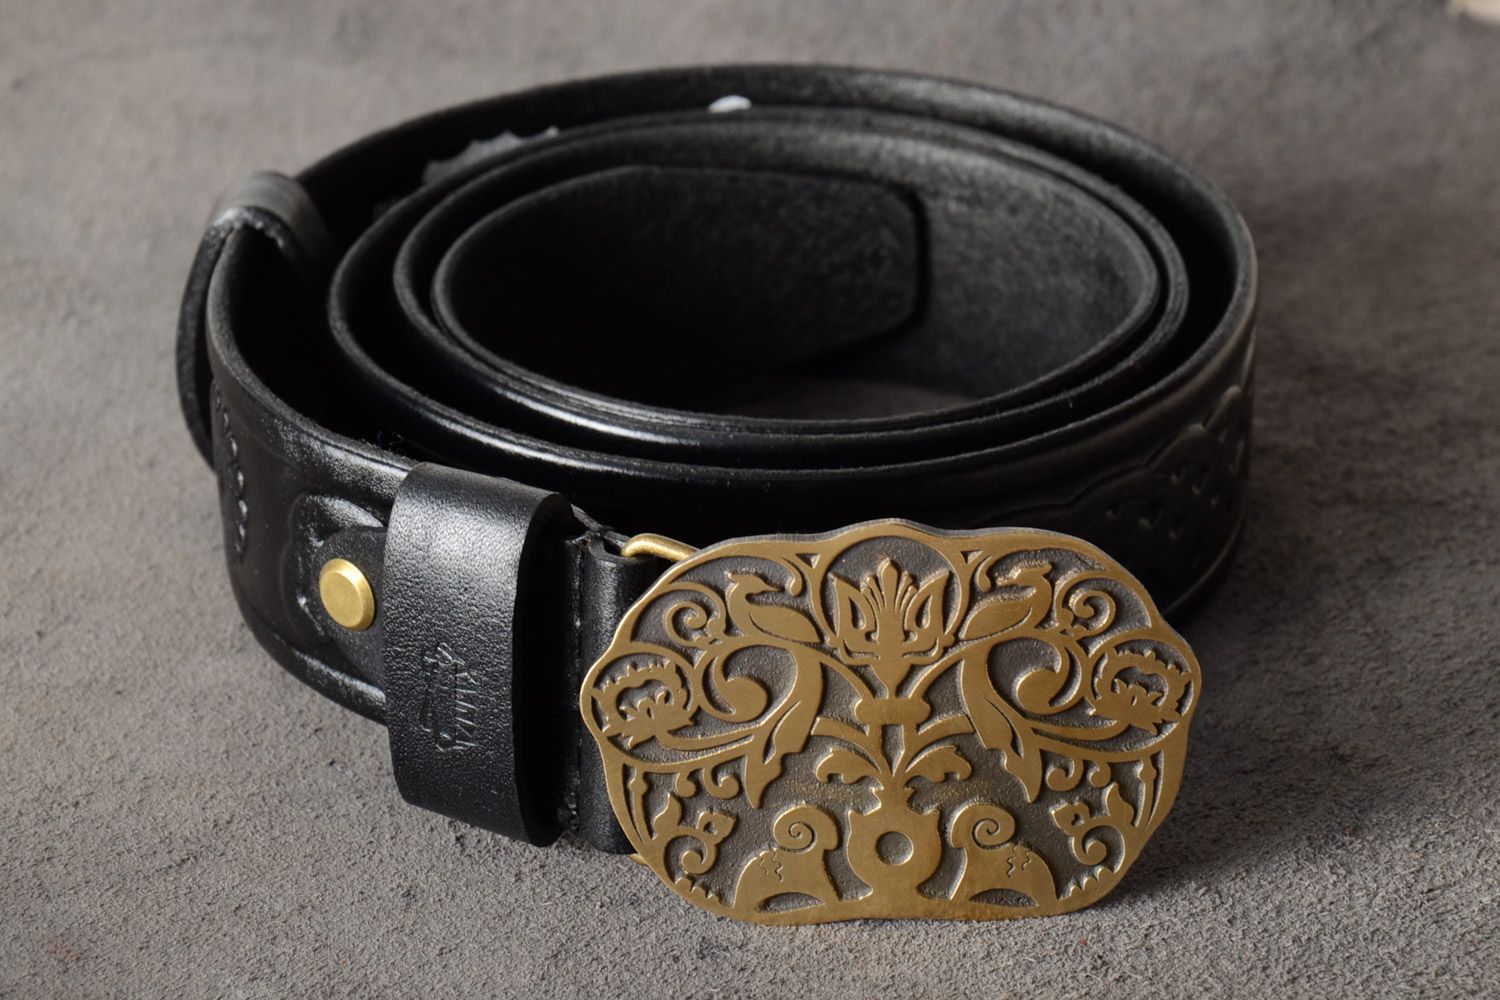 Handmade genuine leather belt with metal buckle and embossment in the shape of vignettes photo 1